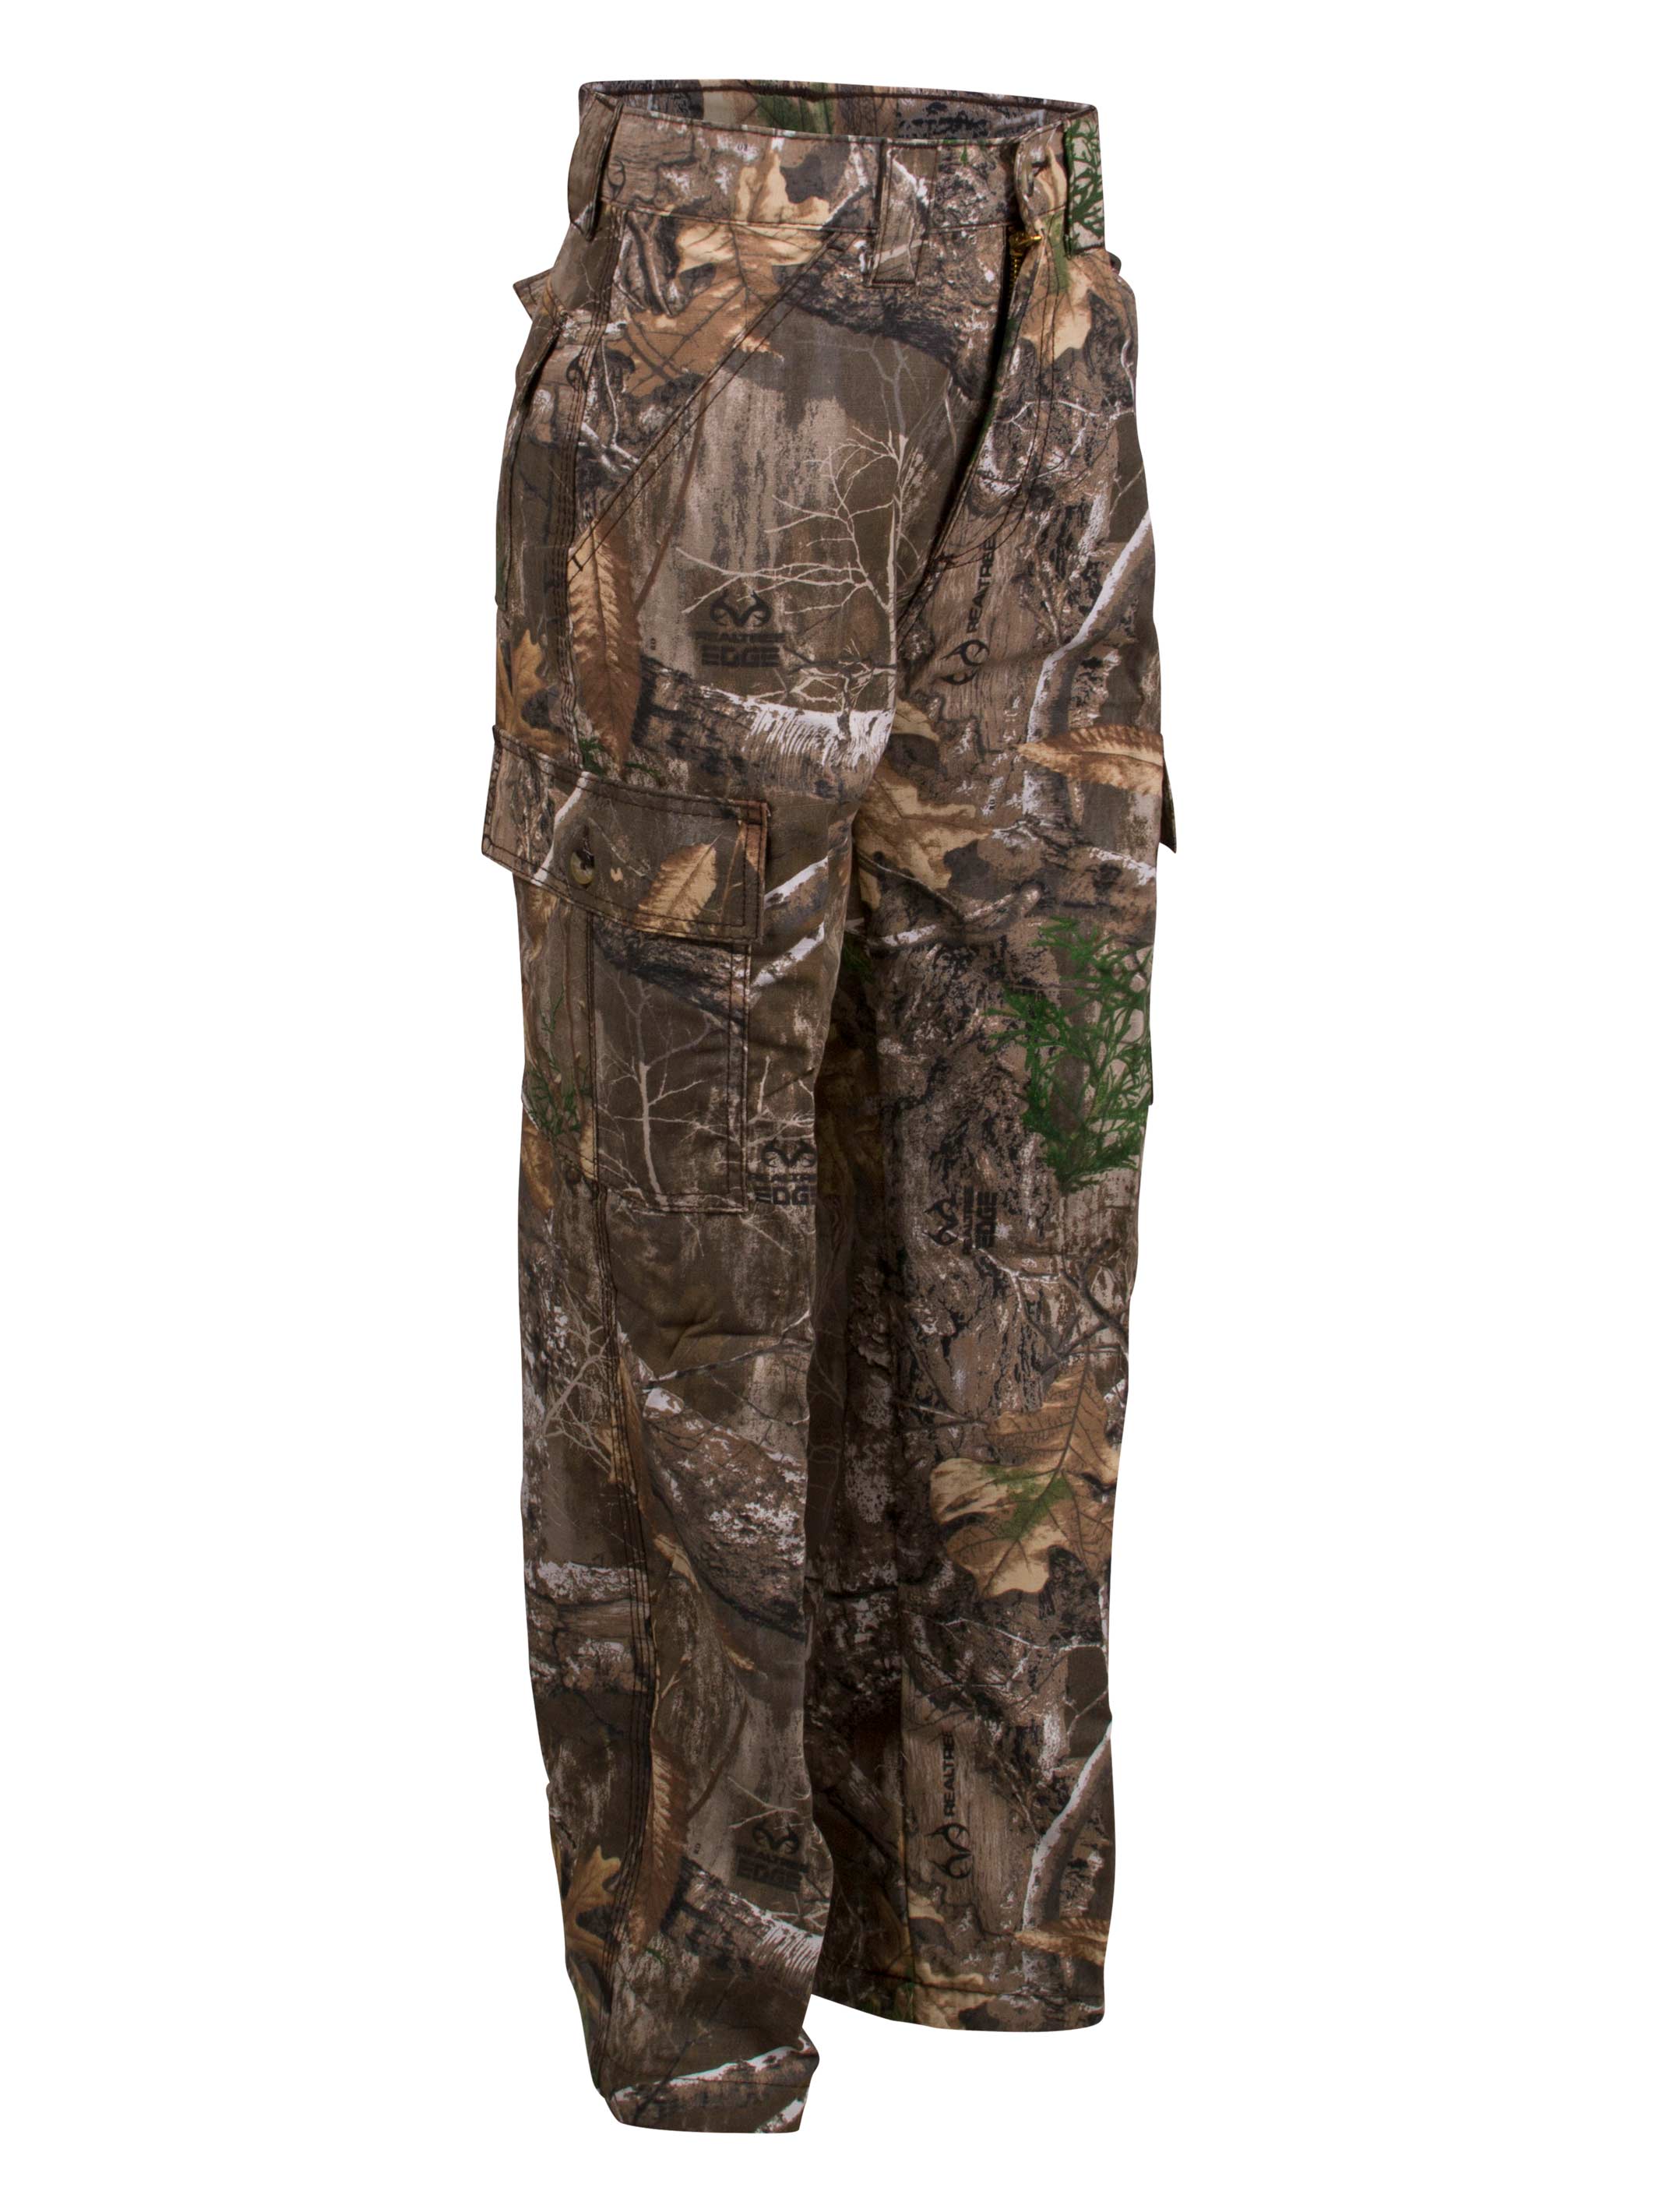 Get your King's Camo Youth Six Pocket Camo Cargo Pants at Smith & Edwards!